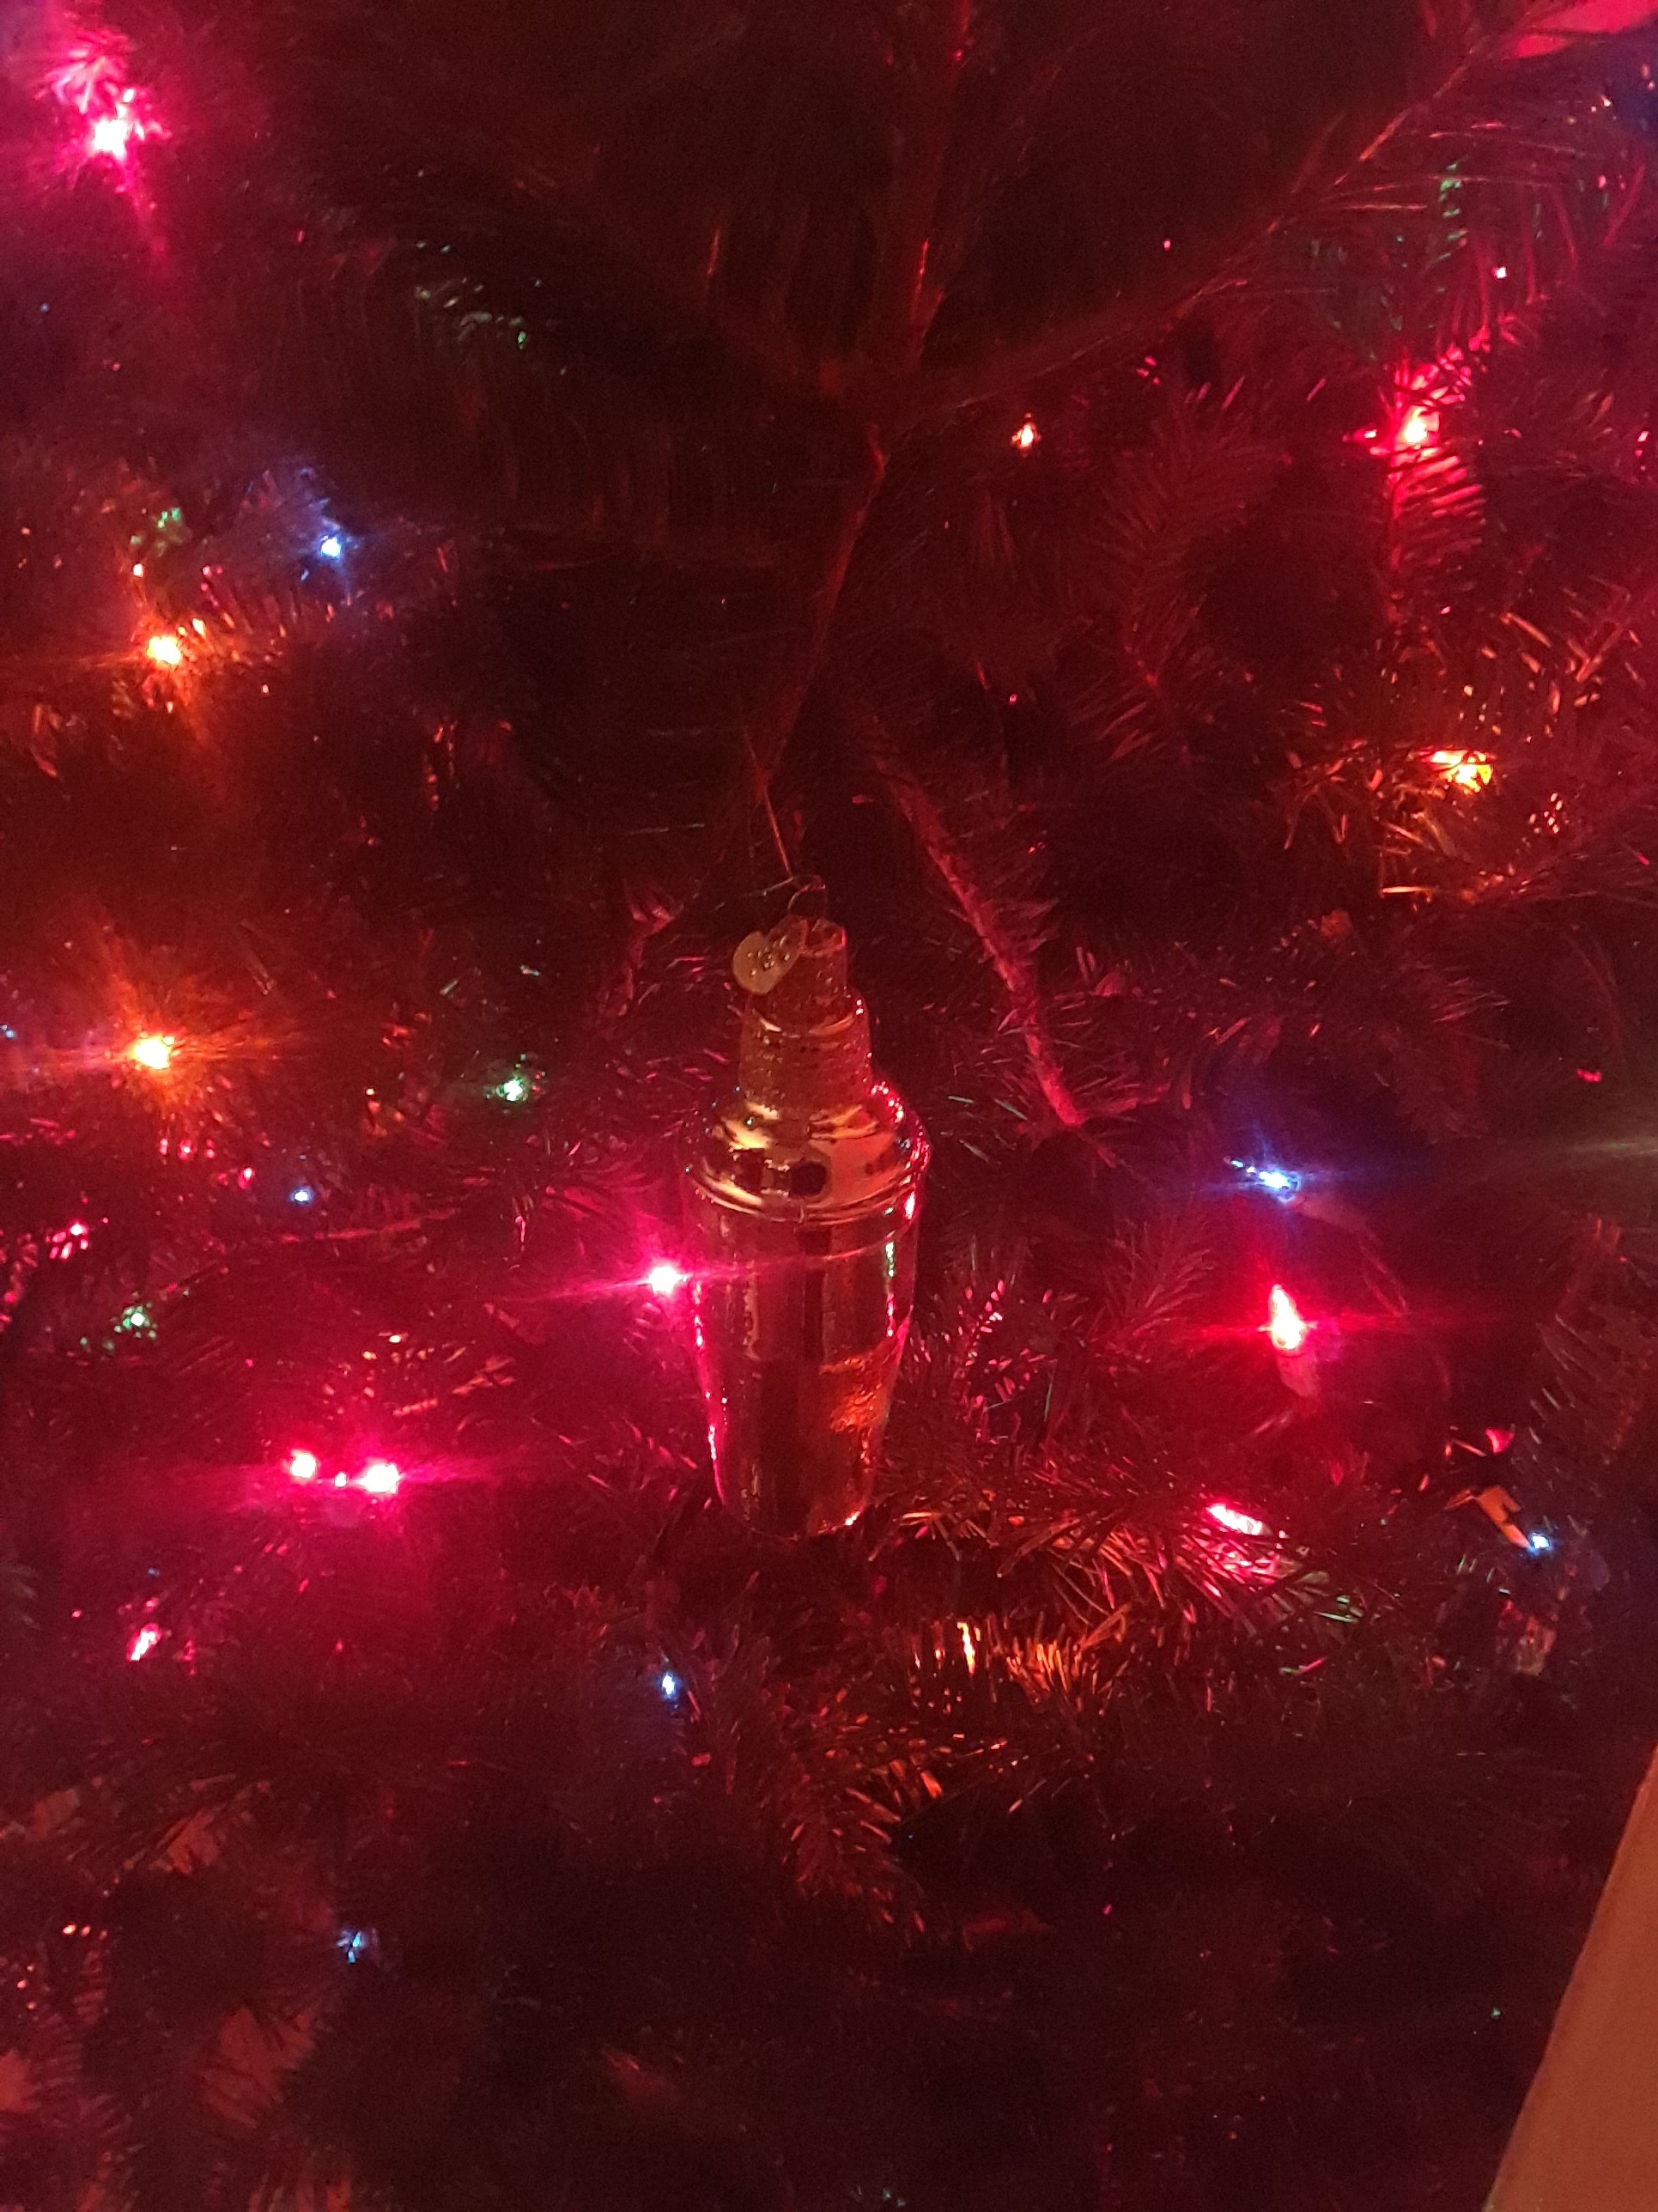 This year's new ornament, a cocktail shaker, Dec 2018